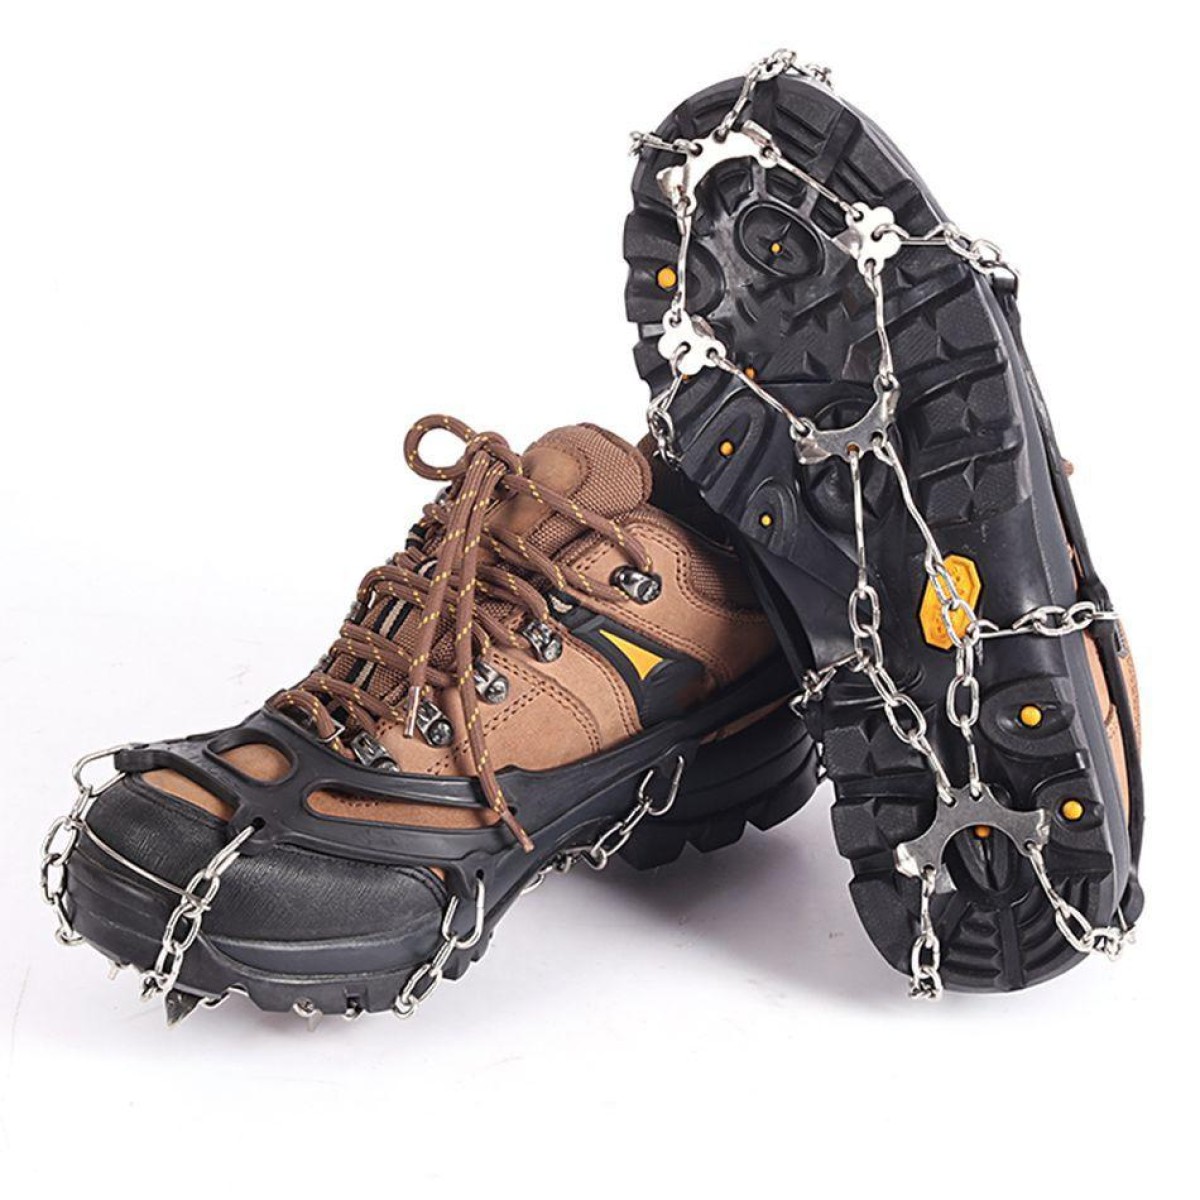 10 Spikes Crampons Ice Snow Non-slip Shoe Cover Outdoor Mountaineering Crampons(Black)